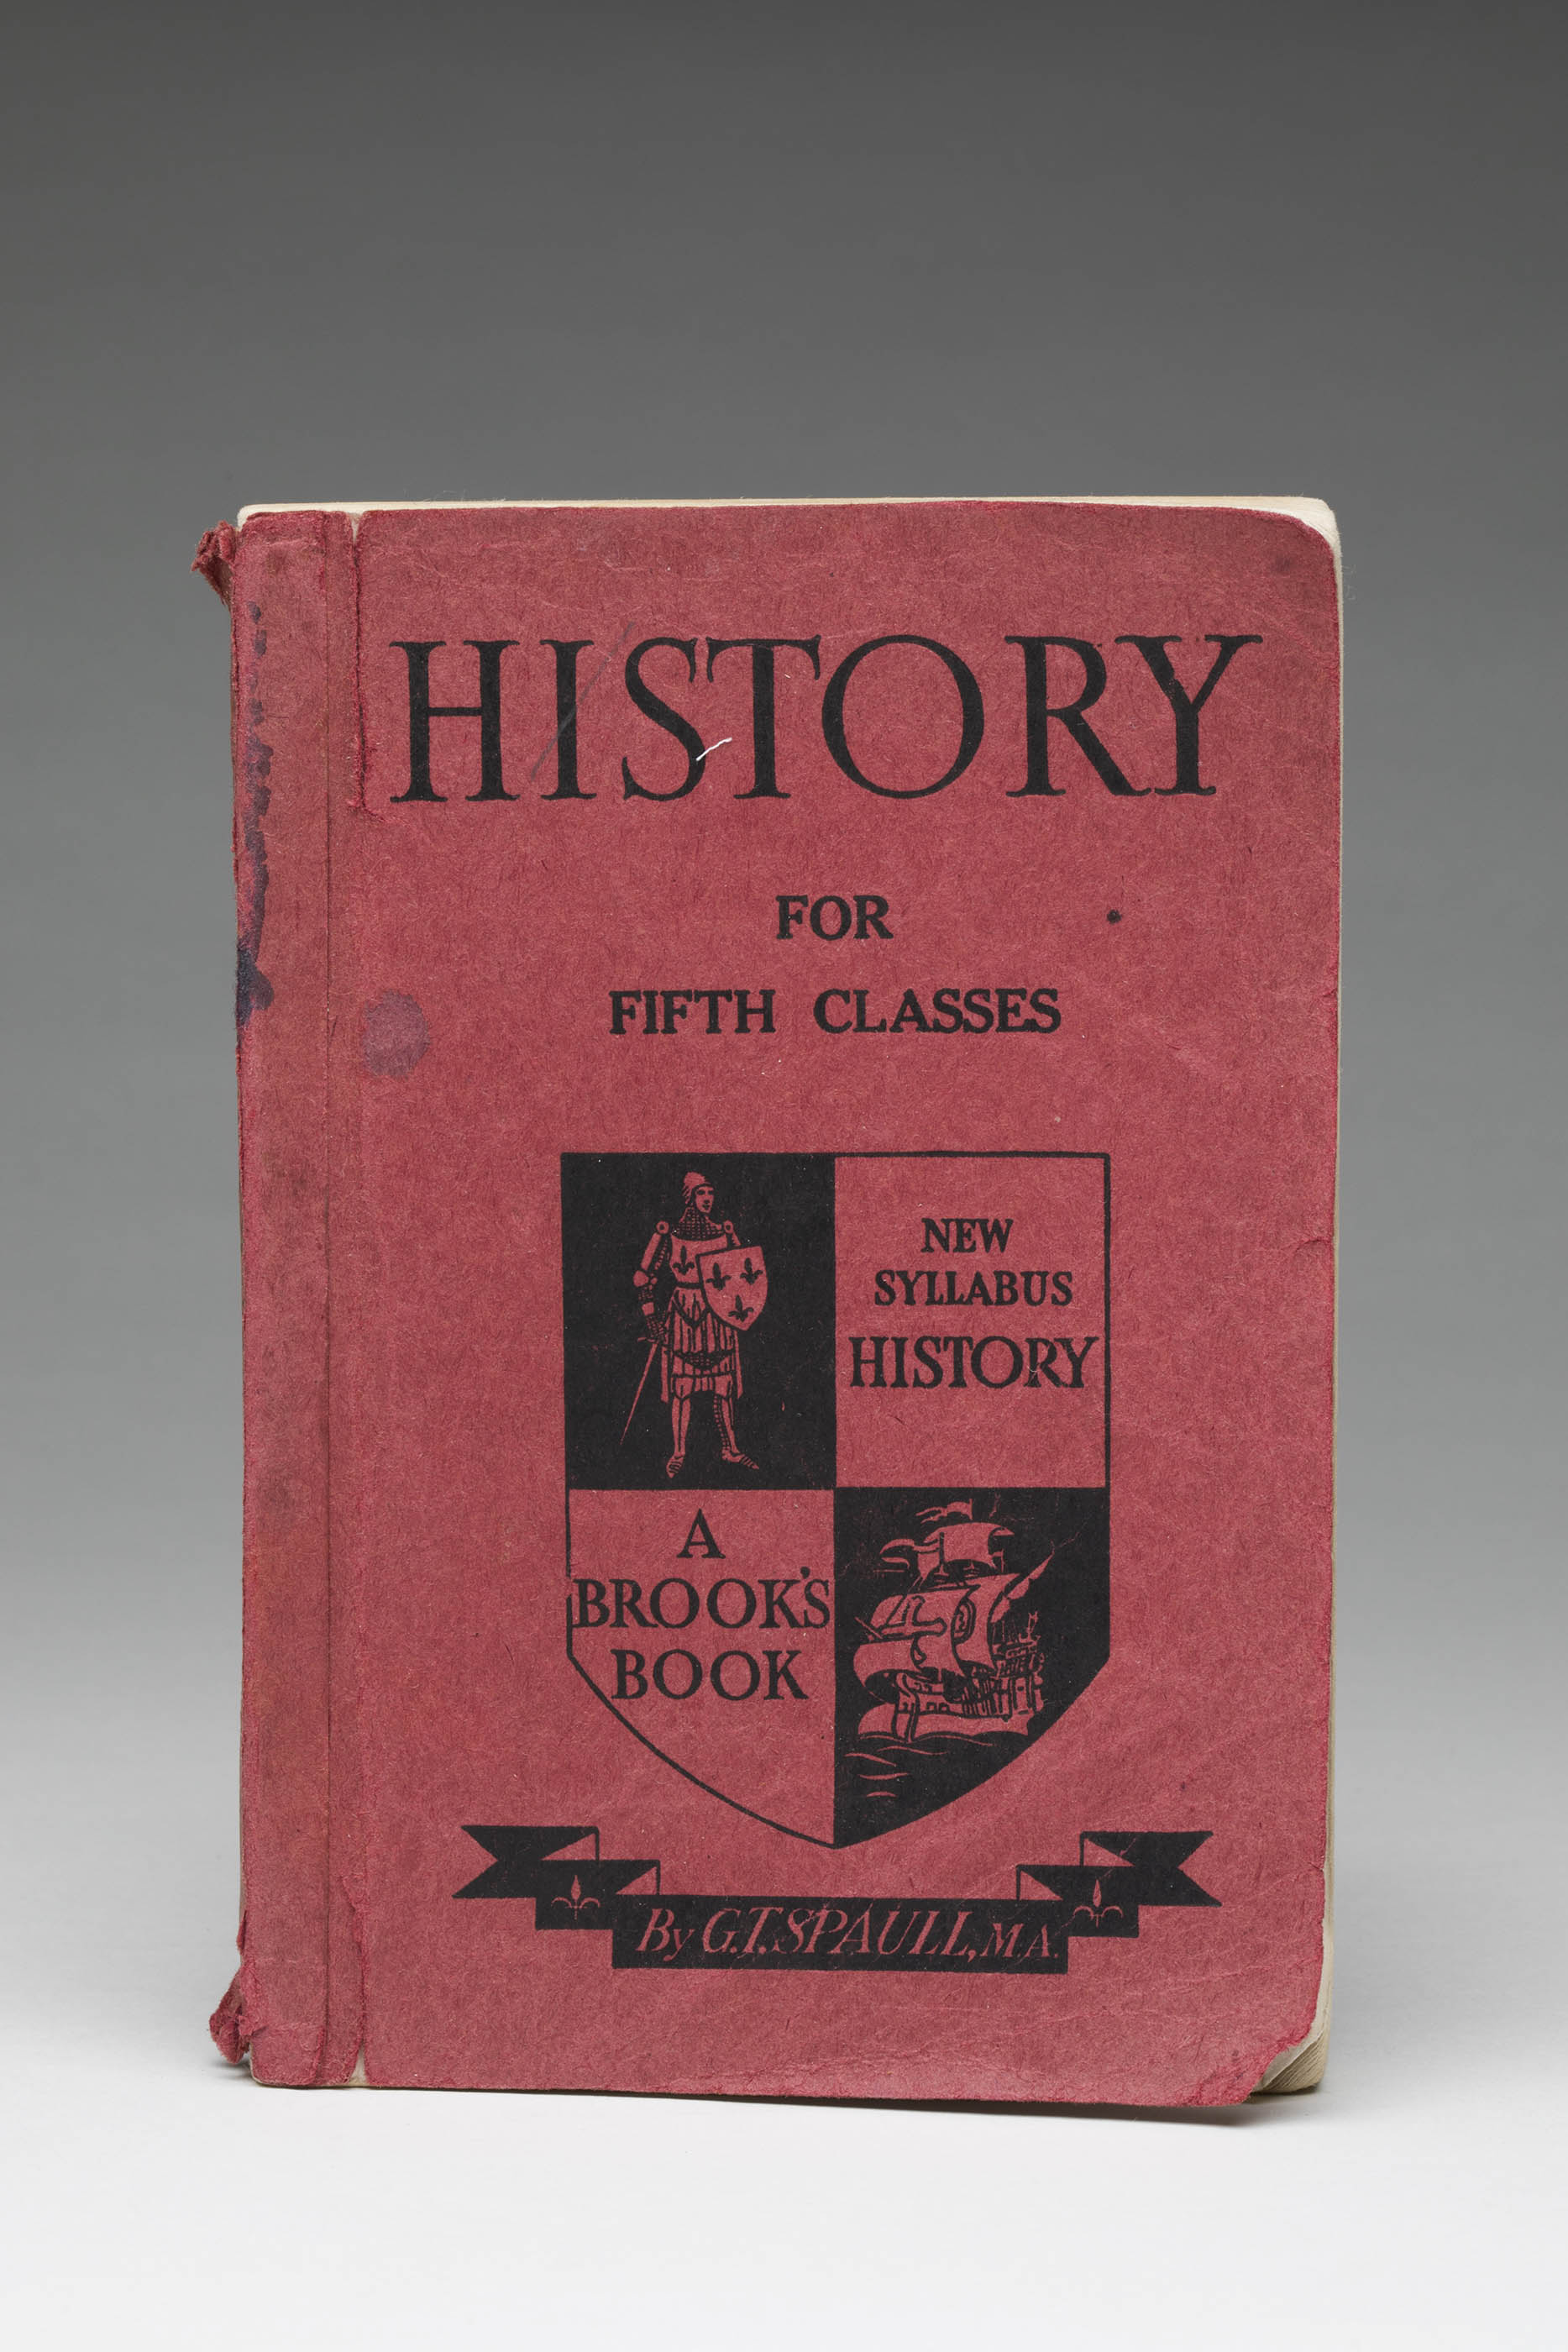  Child’s history textbook titled History for Fifth Classes.